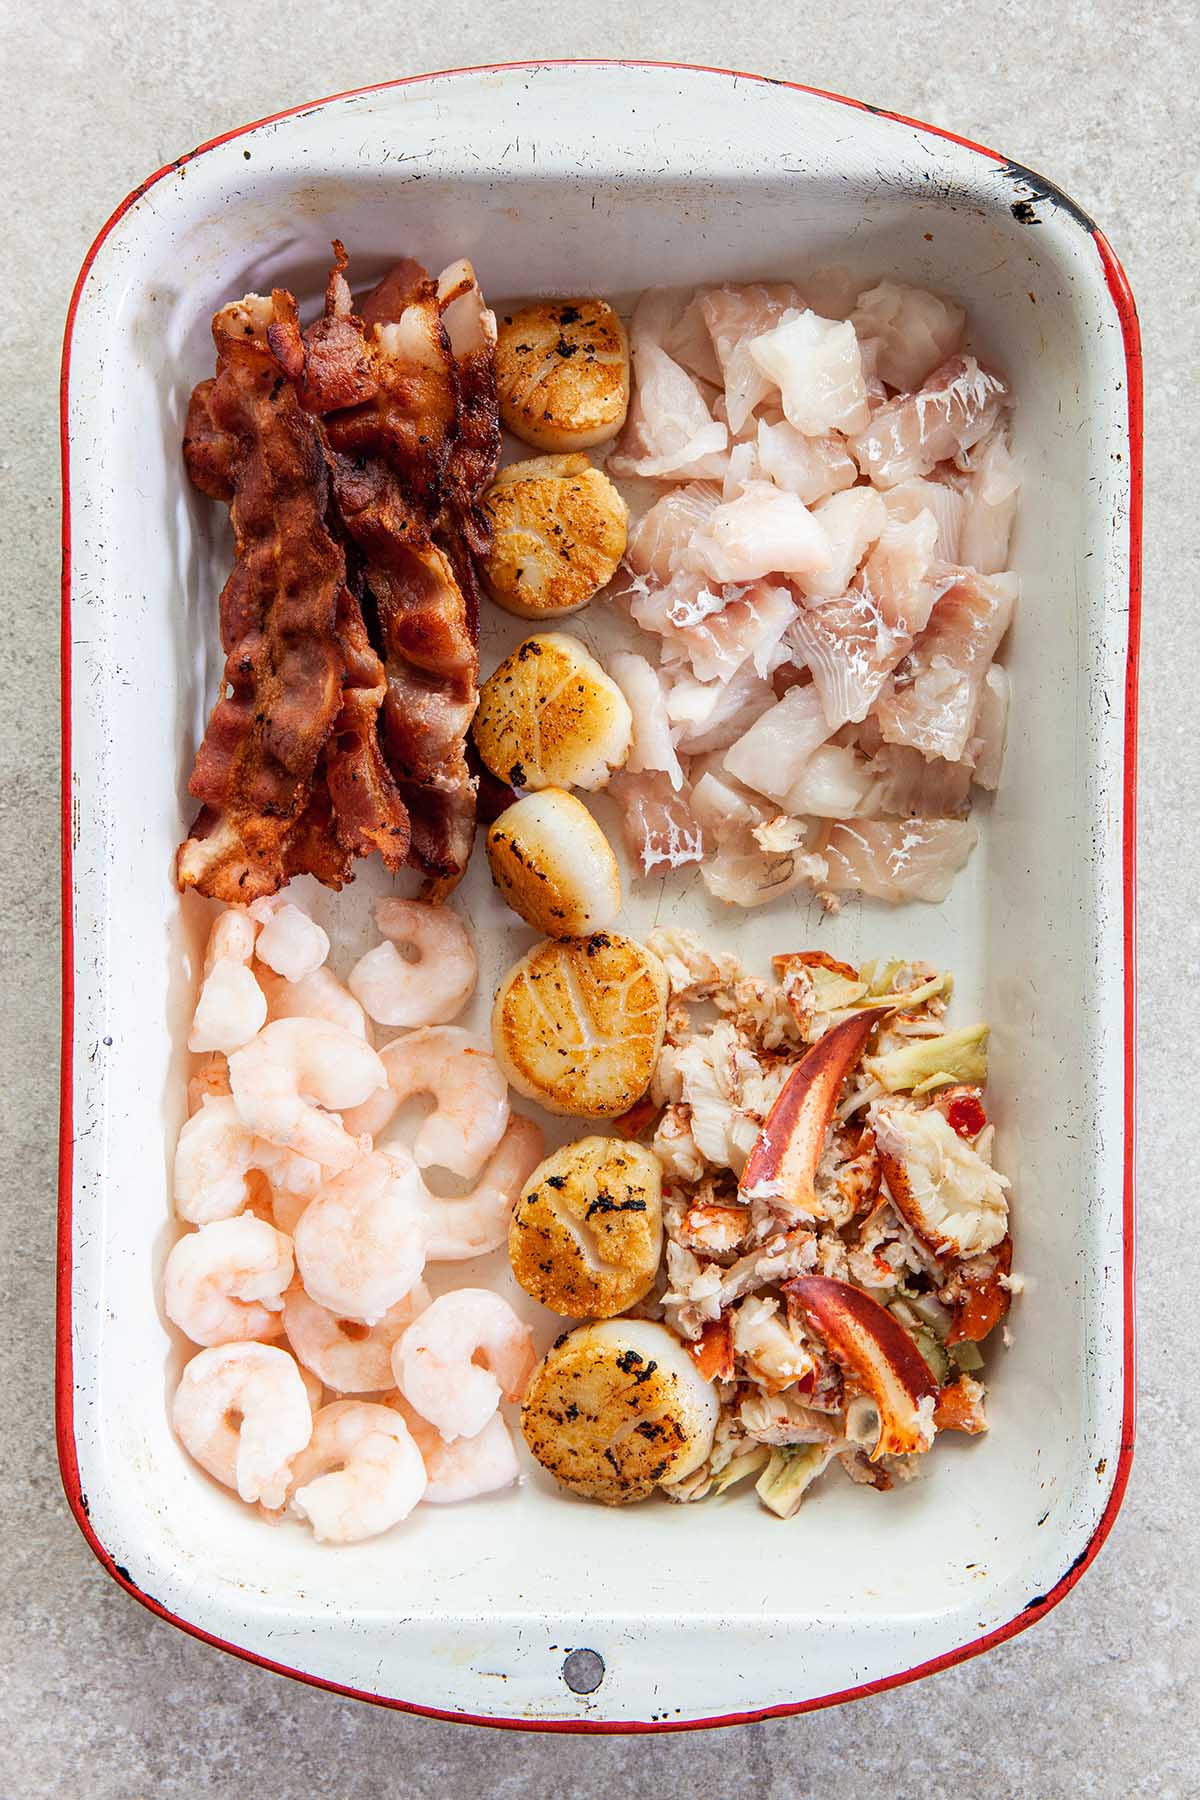 A large white enamel baking dish with red trim filled with slices of cooked bacon, pan-seared scallops, fresh haddock pieces, cooked lobster meat, and small cooked shrimp.